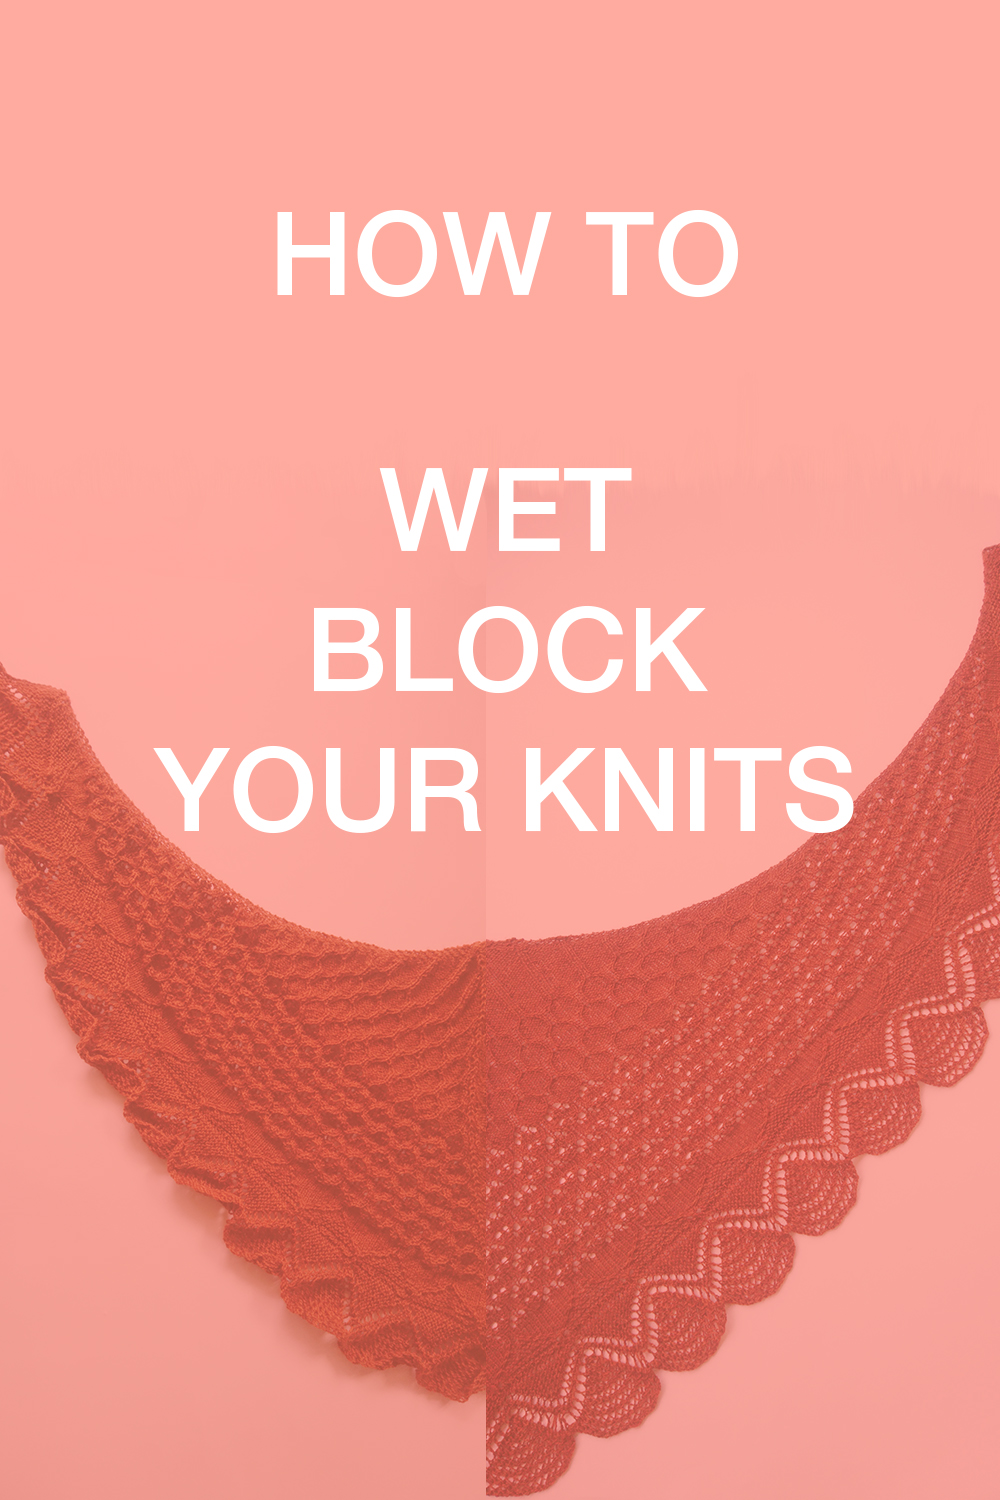 How to wet block your knits Pinterest donnarossa tutorial